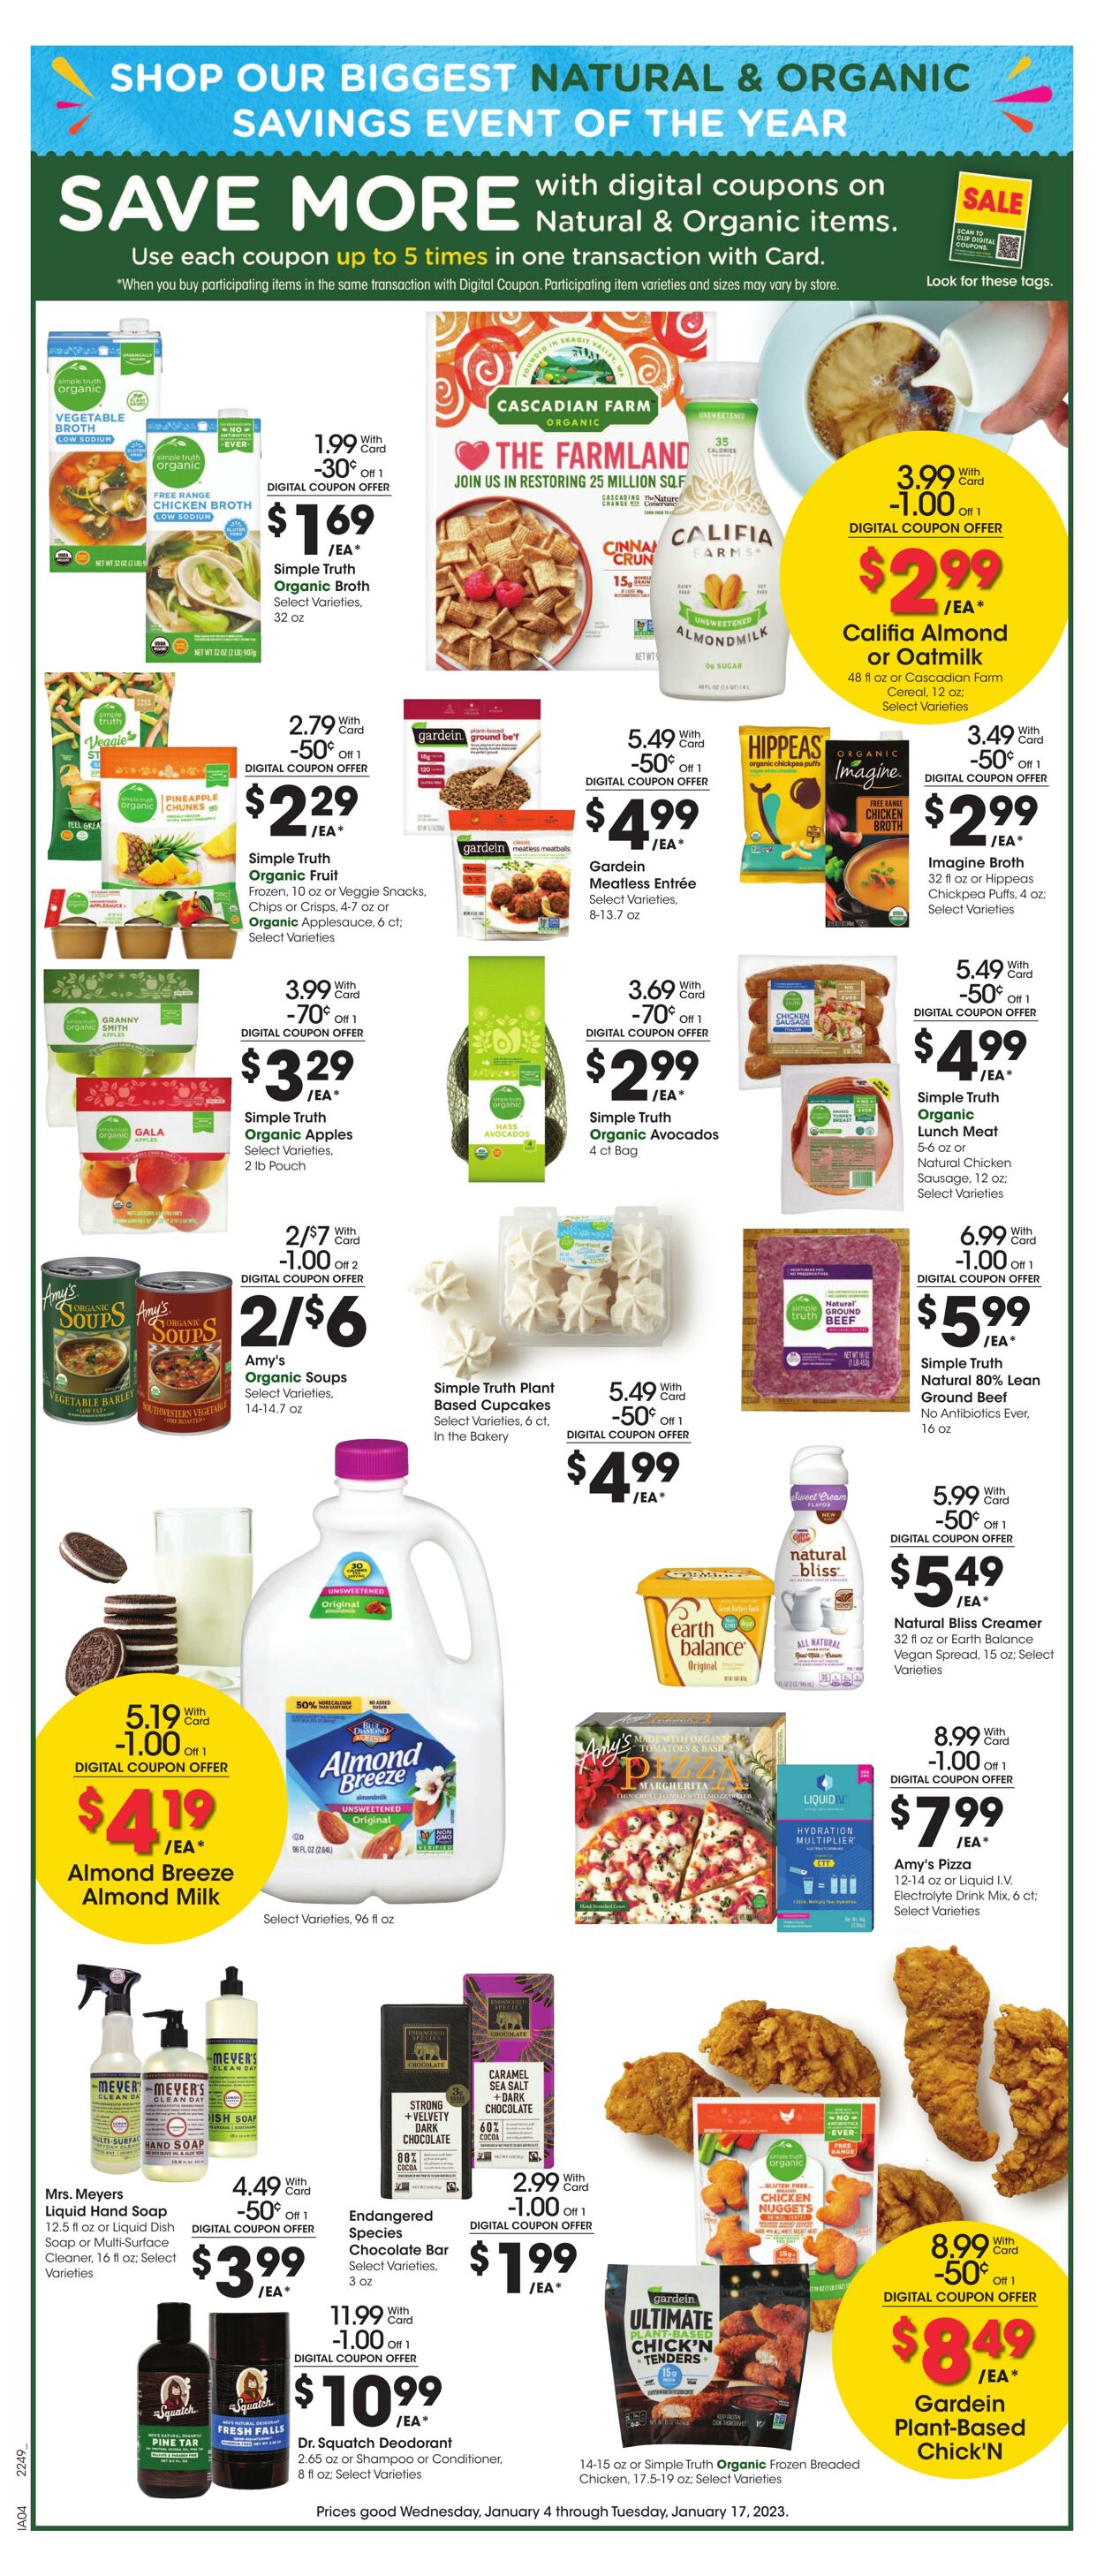 Weekly ad Smith’s Food and Drug 01/11/2023 - 01/17/2023